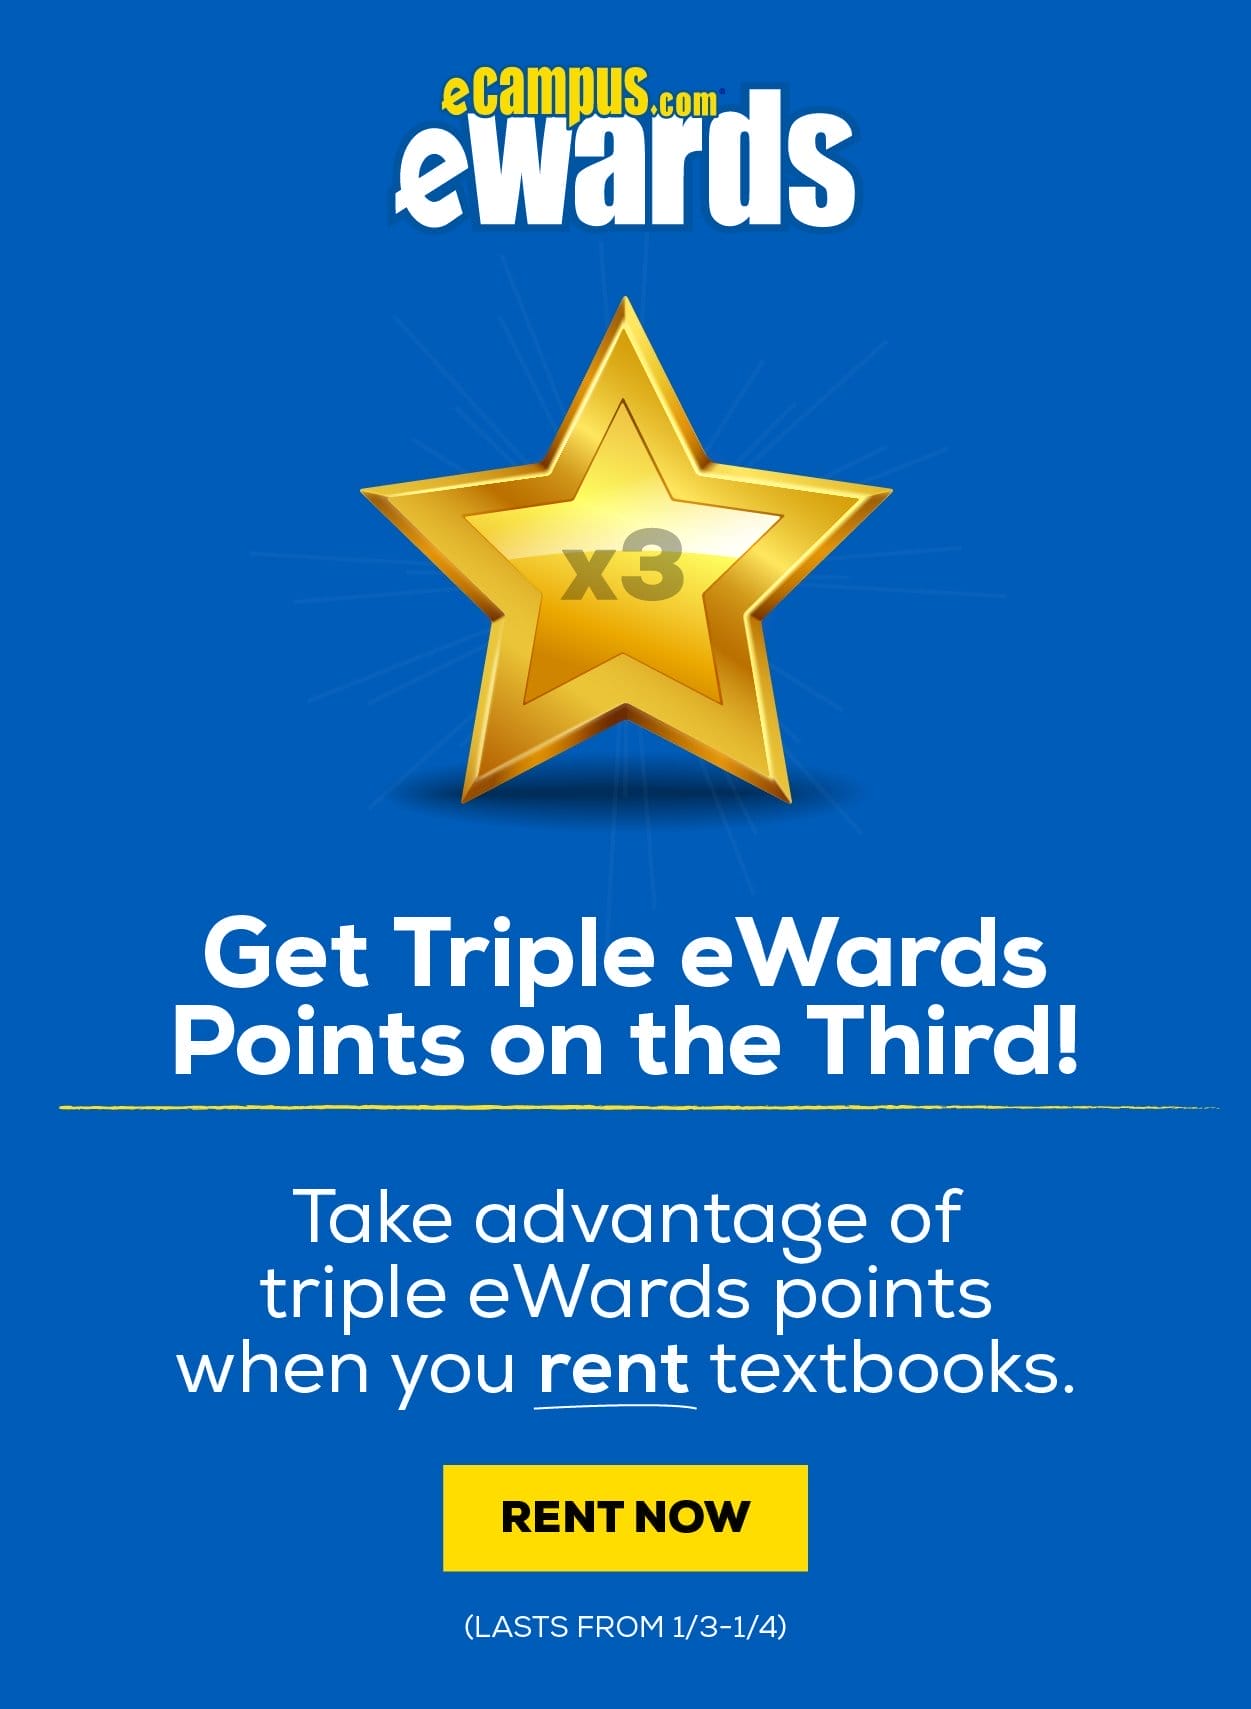 eCampus.com eWards | Get Triple eWards Points on the Third! Take advantage of triple eWards points when you rent textbooks. (Lasts From 1/3-1/4) | Solid blue background with a x3 gold star in the middle